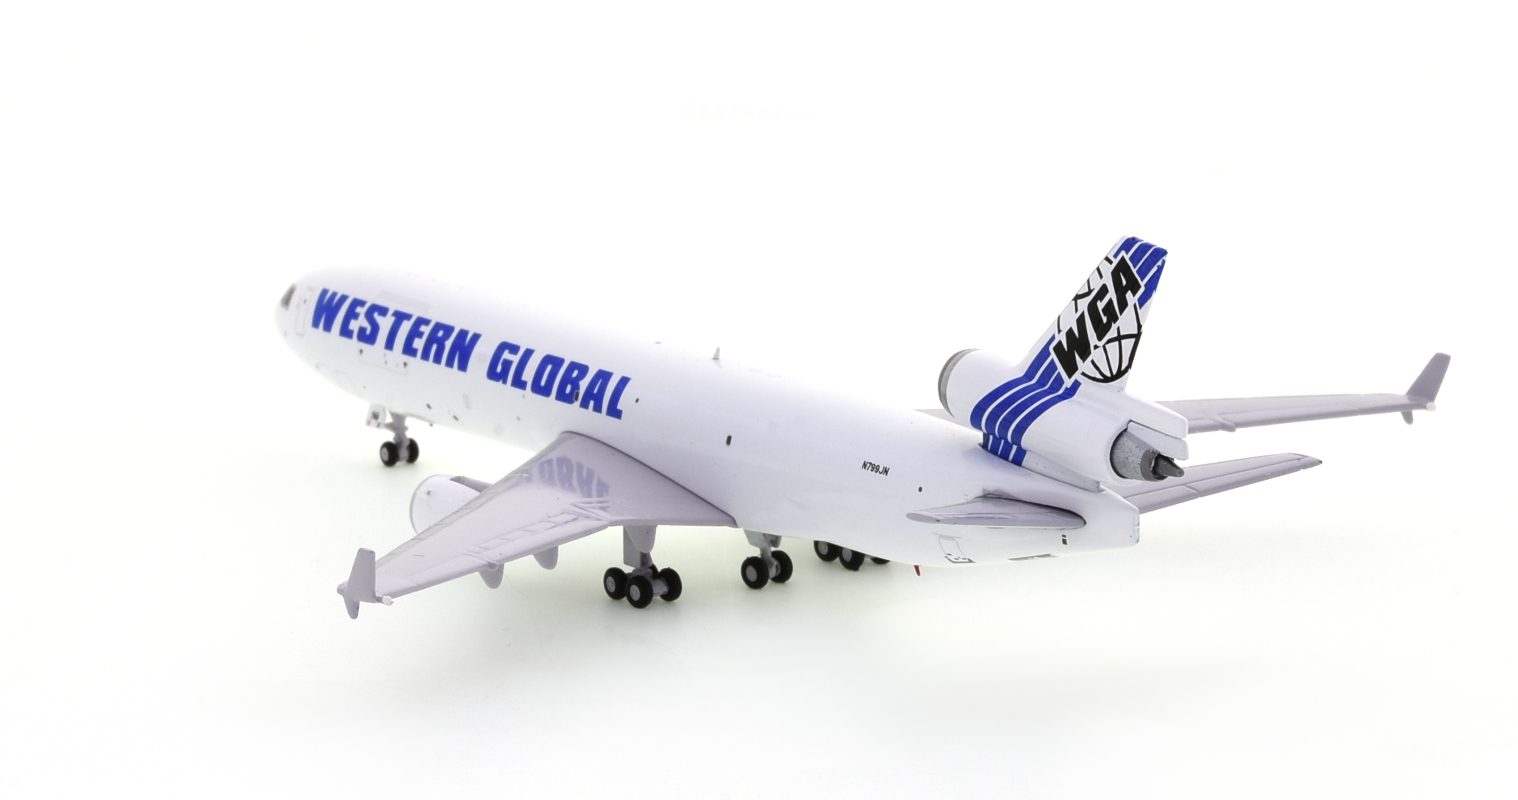 Rear view of the McDonnell Douglas MD-11F 1/400 scale diecast model of registration N799JN in the livery of Western Global Airlines - Gemini Jets GJUPS3791 